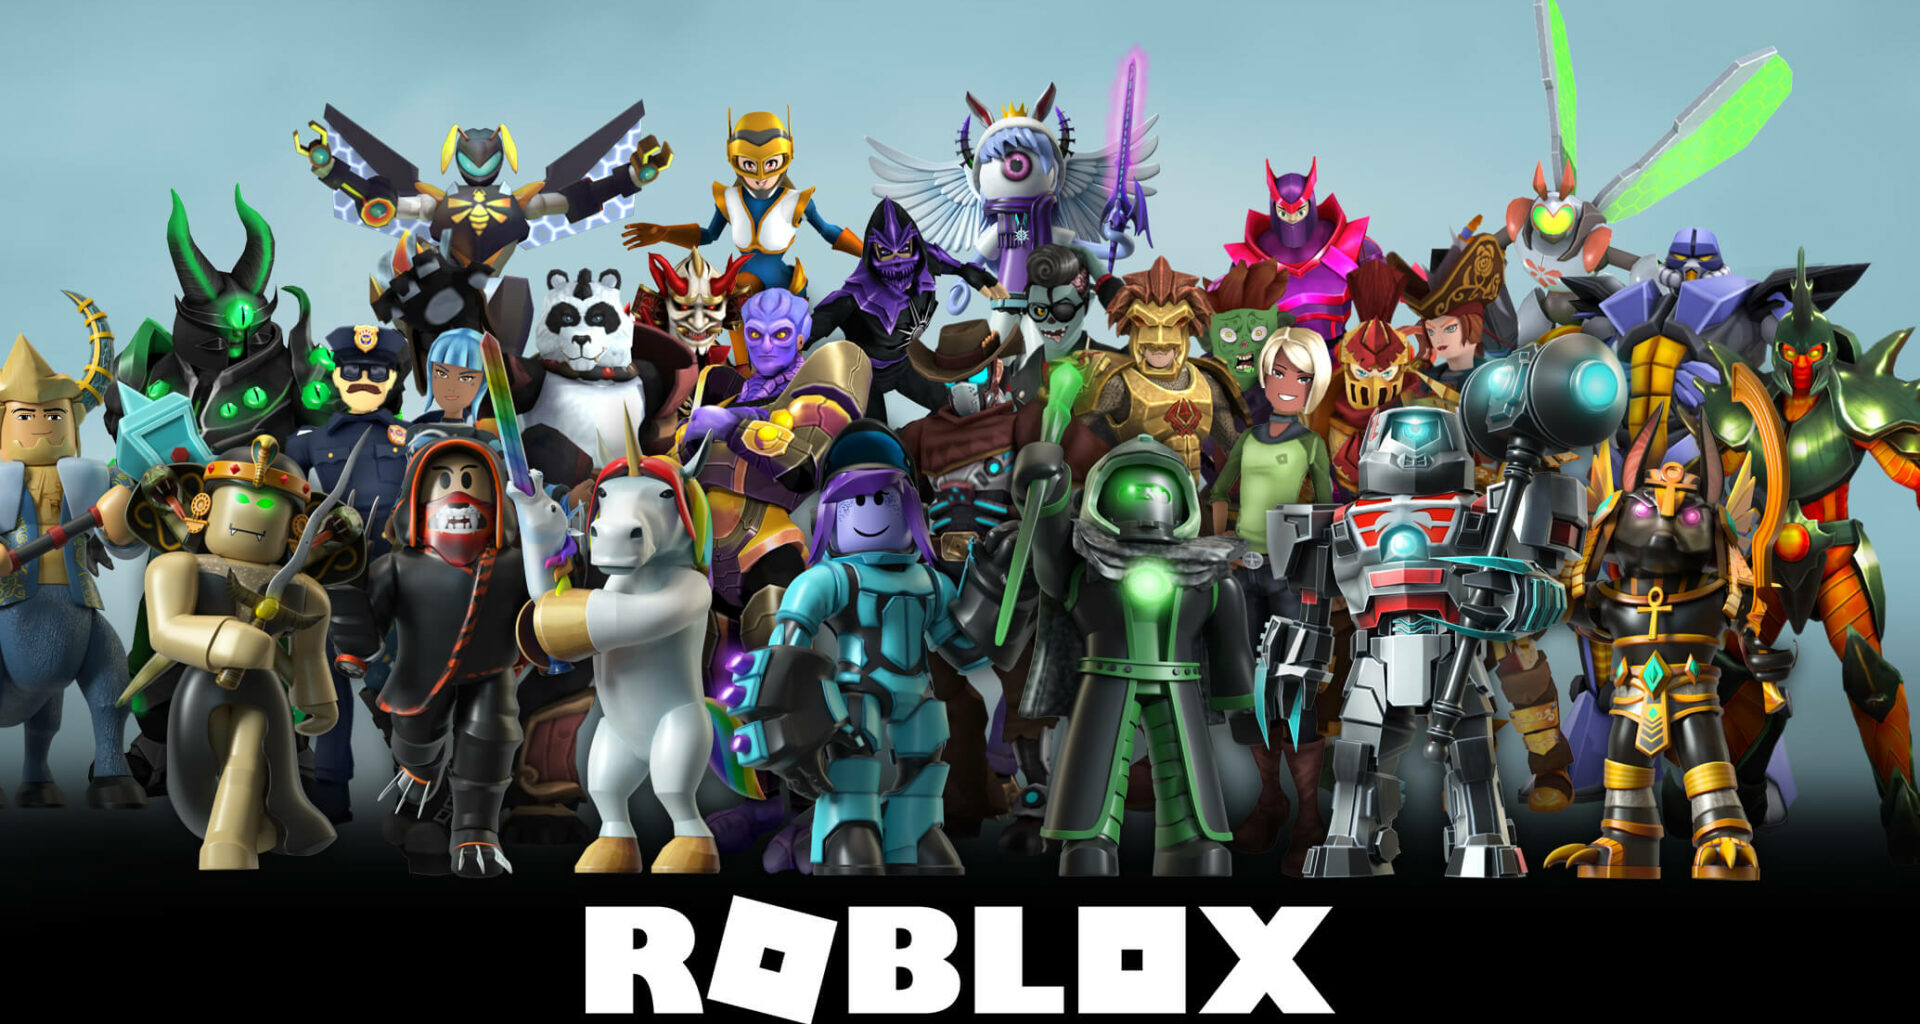 Download Roblox Apk For Free If You Can T Get Minecraft Apk Legally - roblox jailbreak hacks march 2018